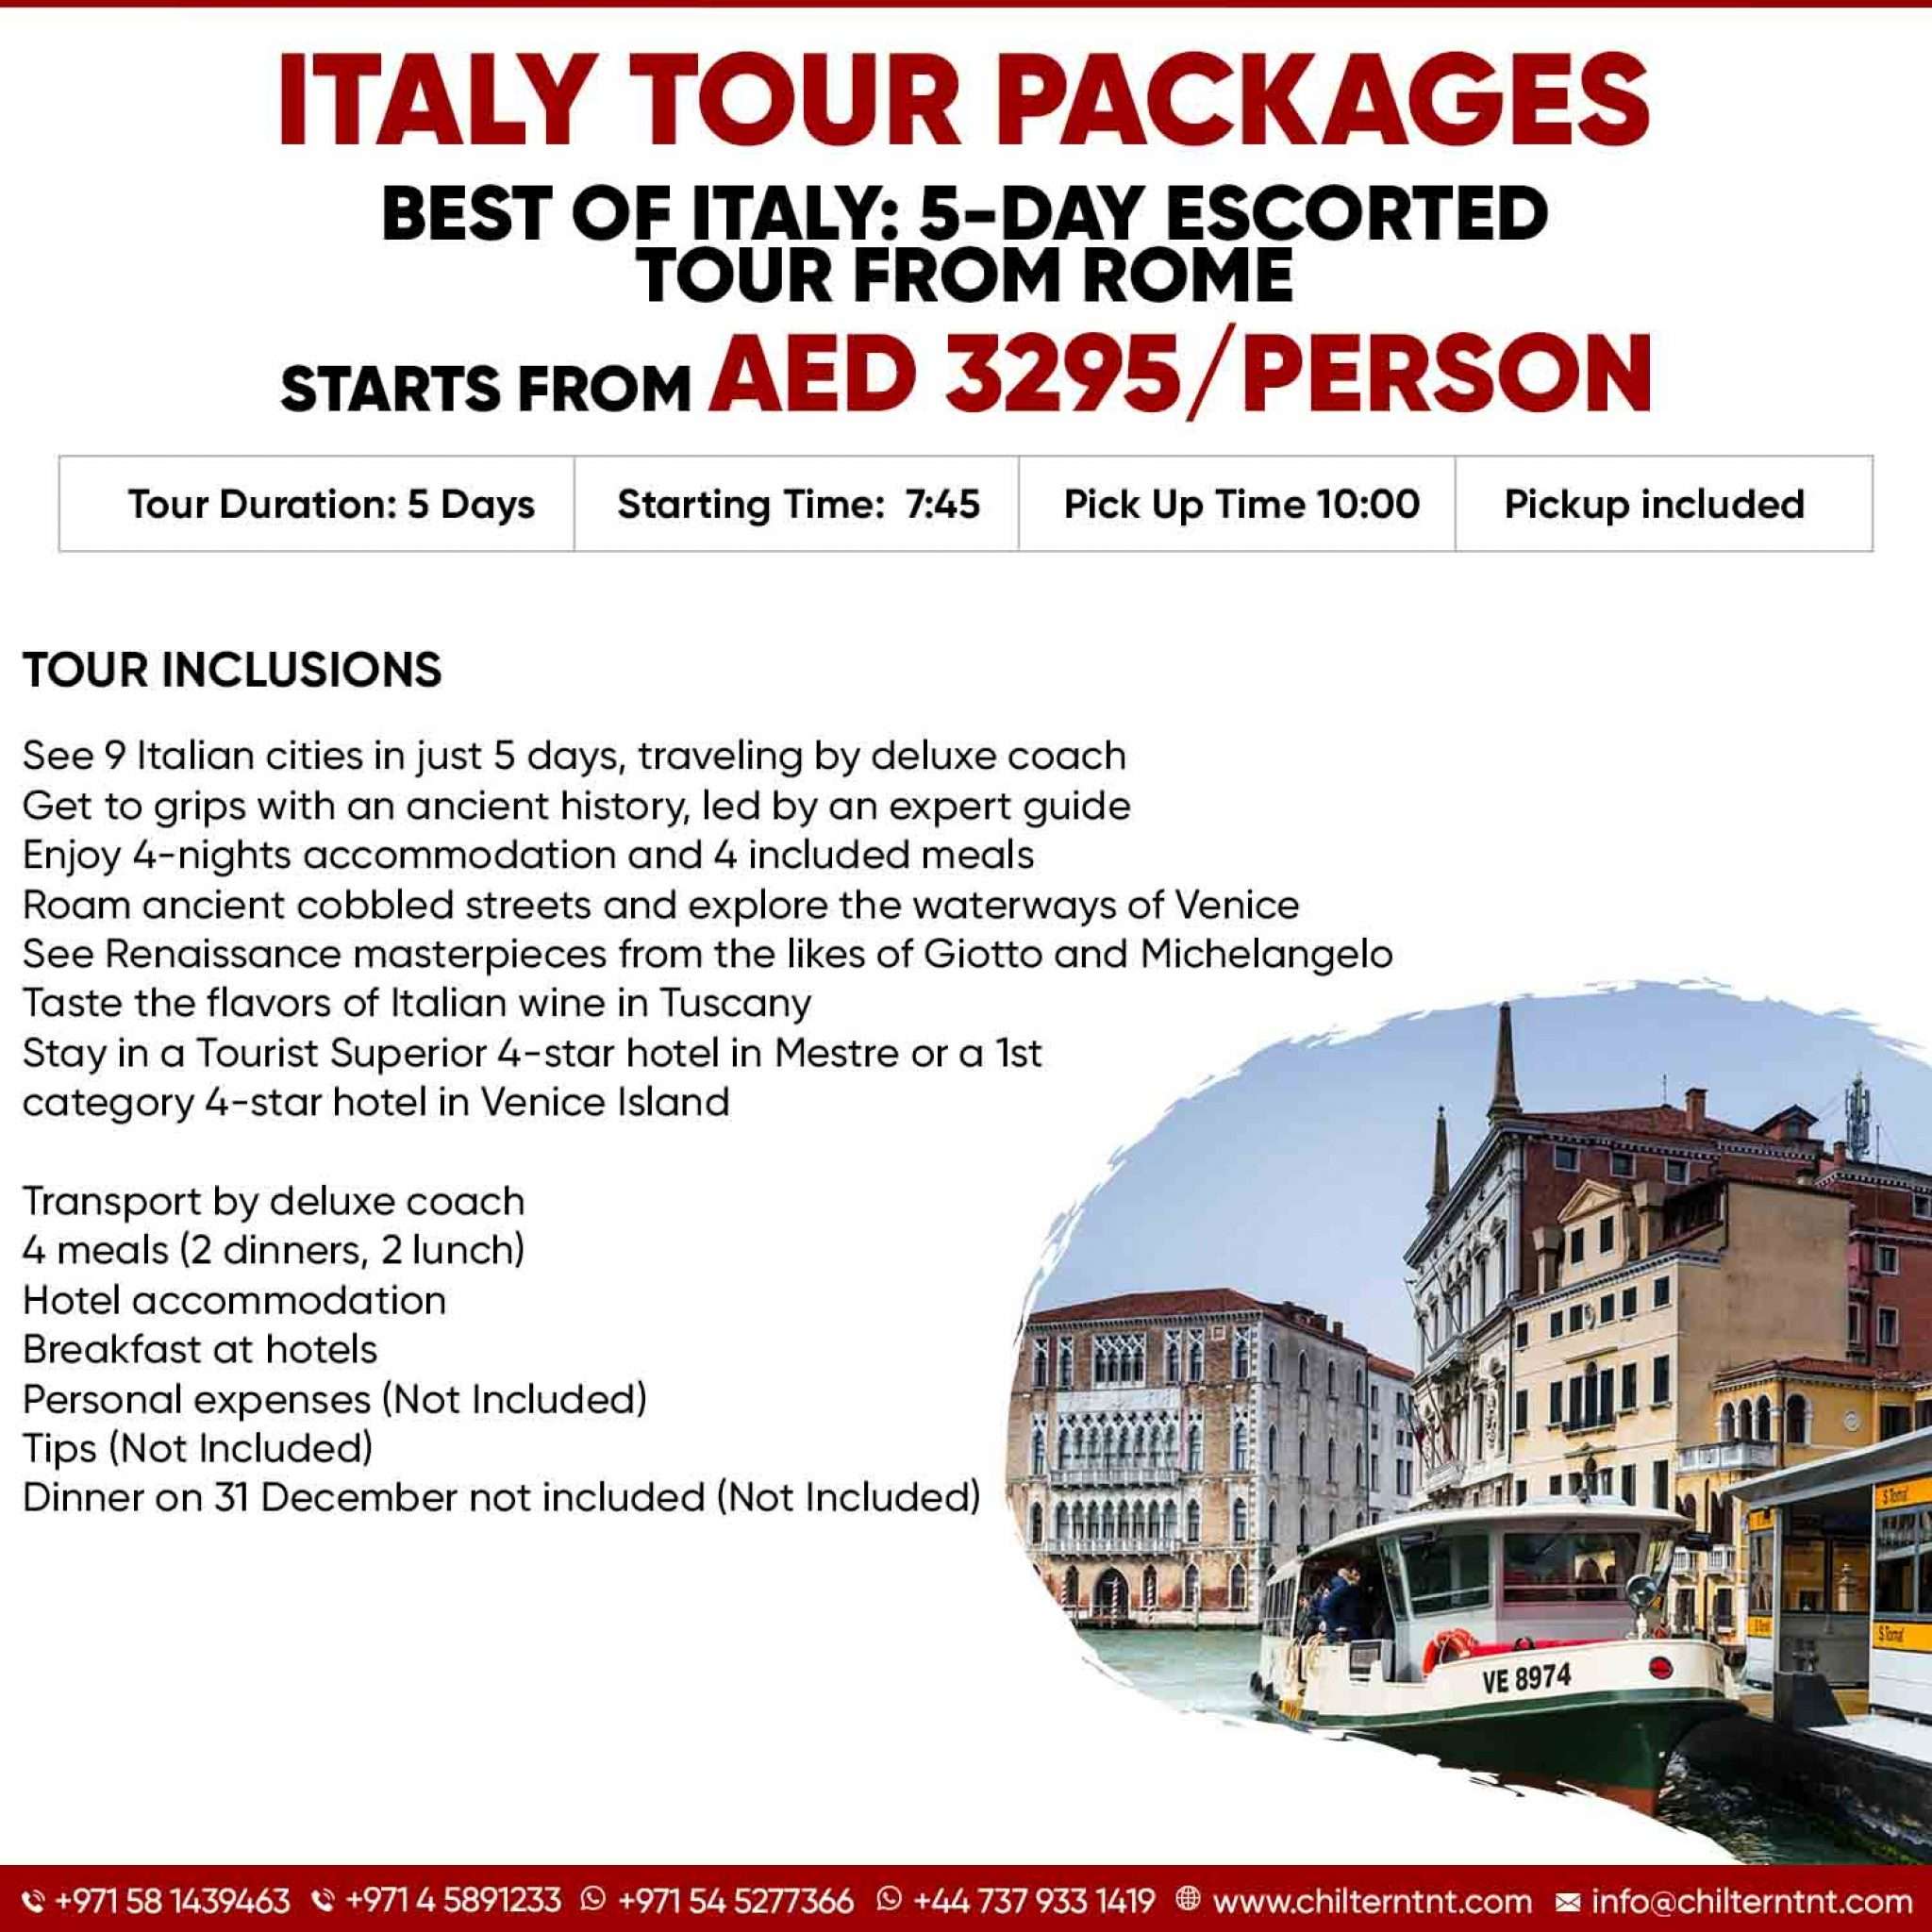 escorted tours in italy